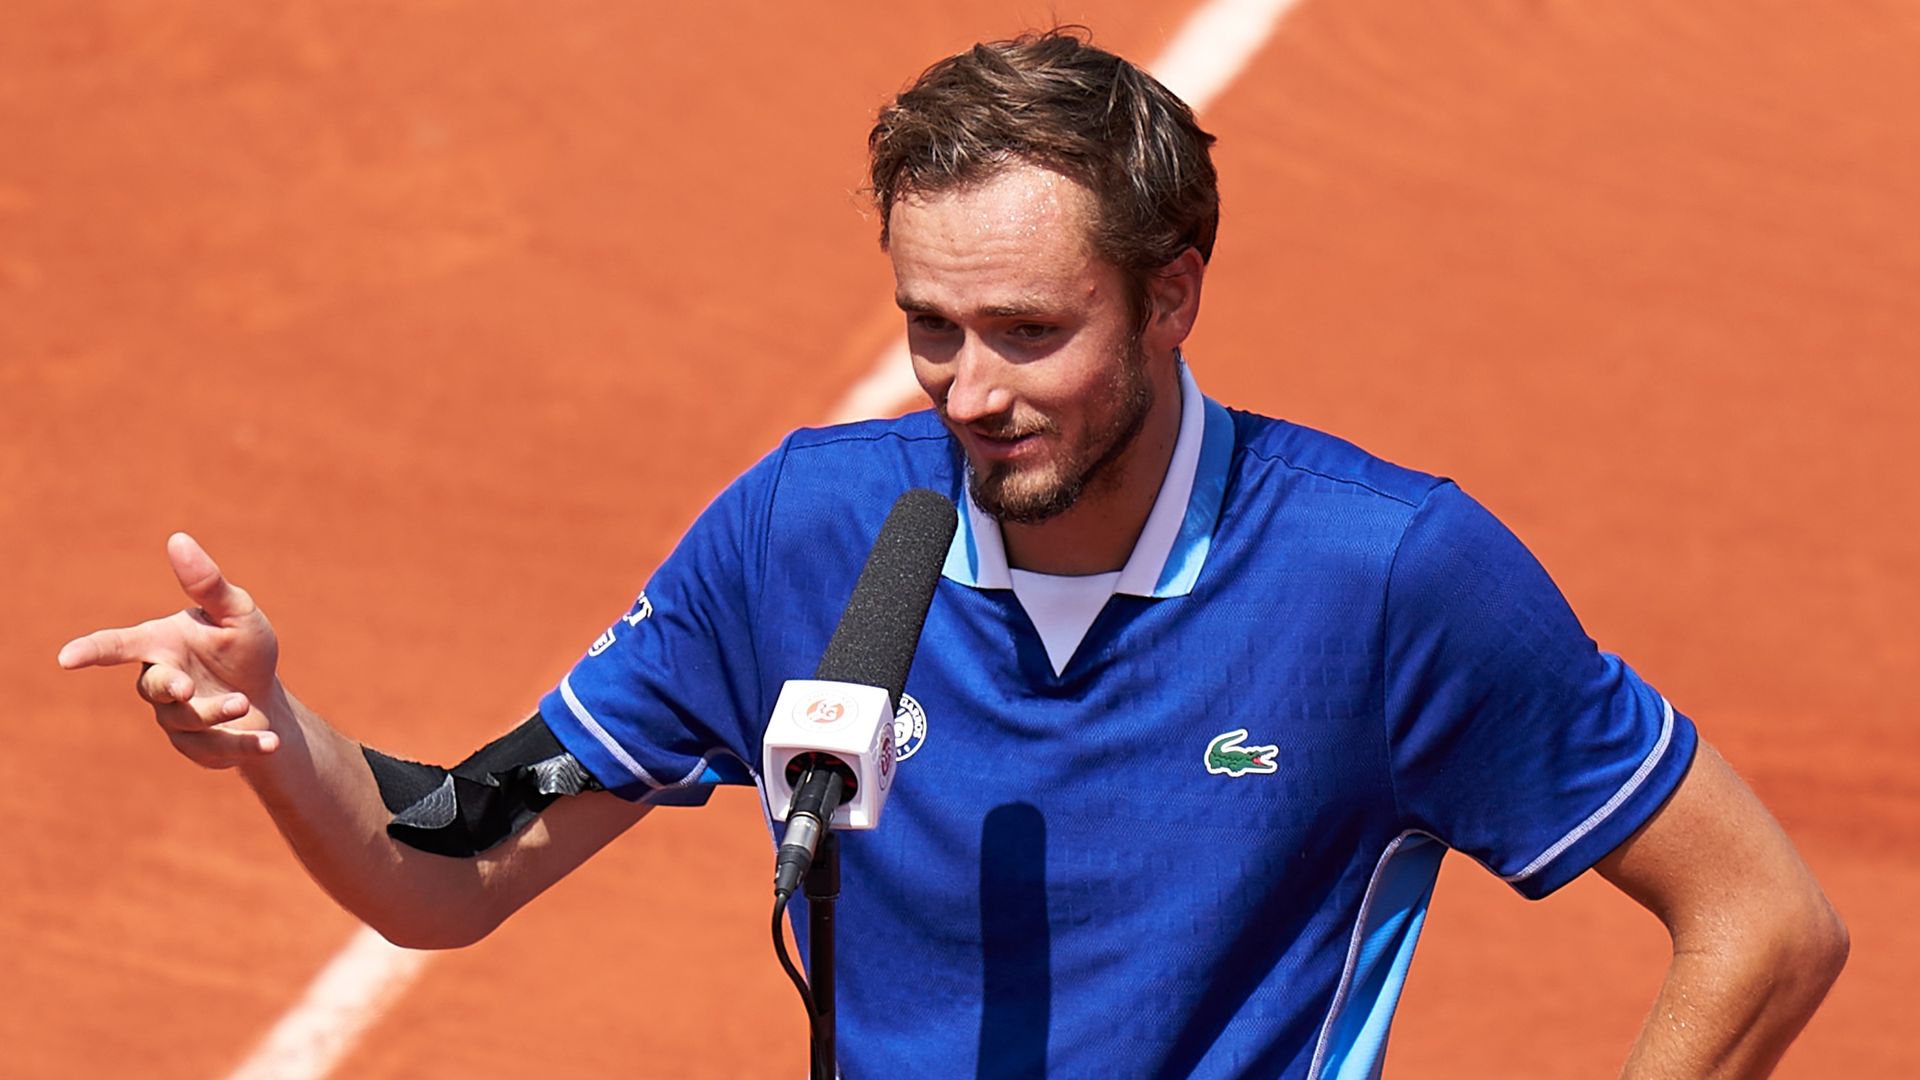 Tennis Channel - It's official, Daniil Medvedev takes the top spot